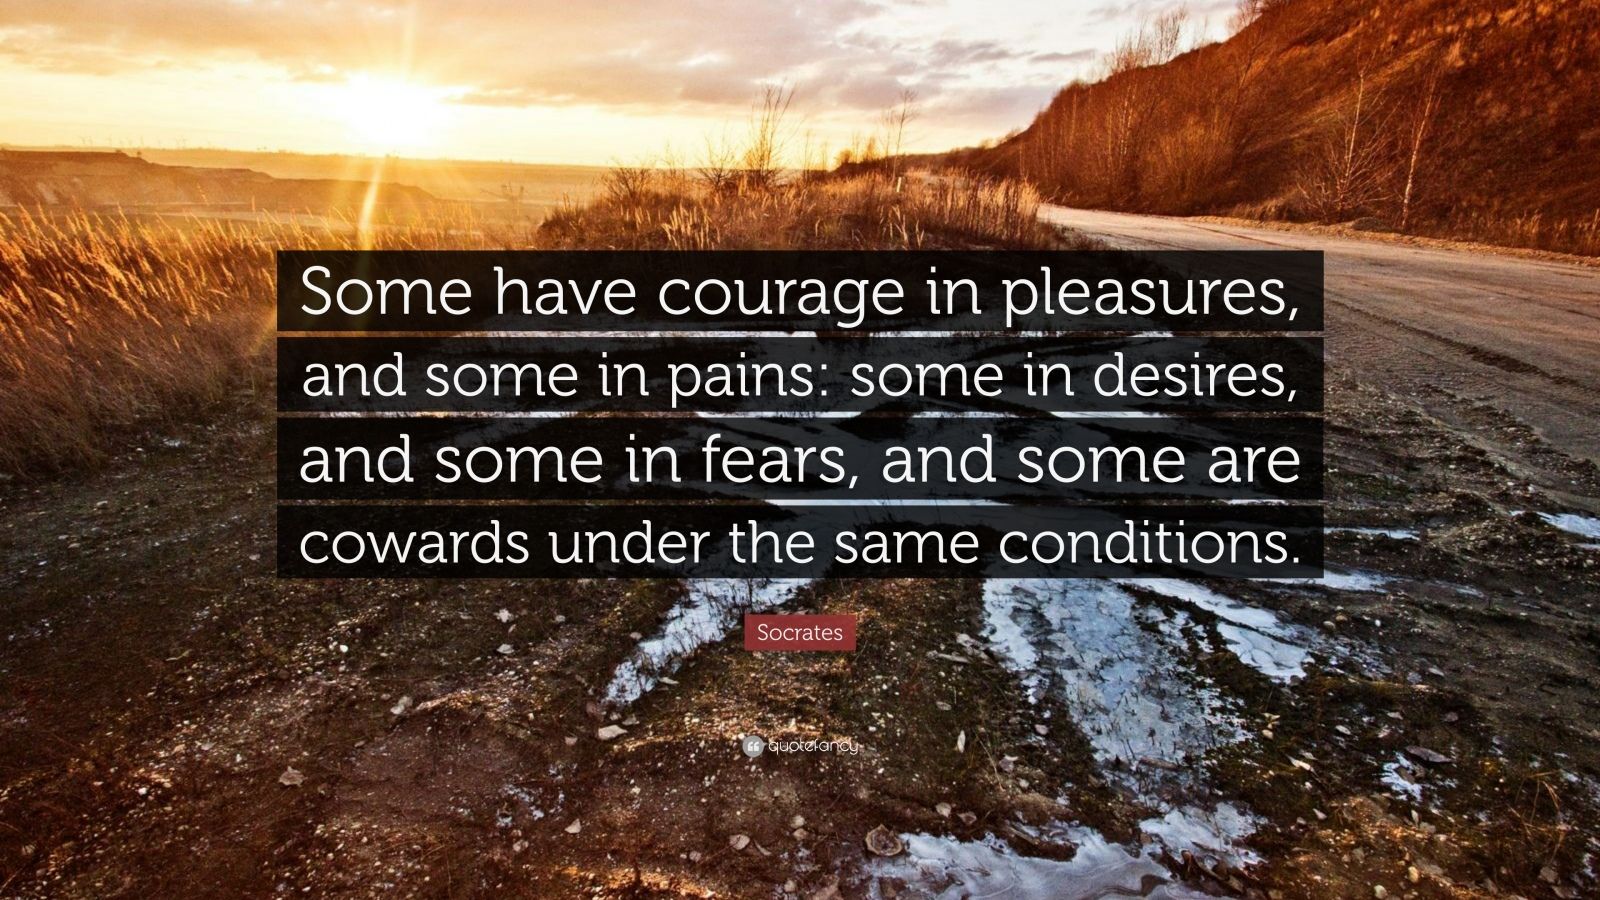 Socrates Quote “Some have courage in pleasures and some in pains some